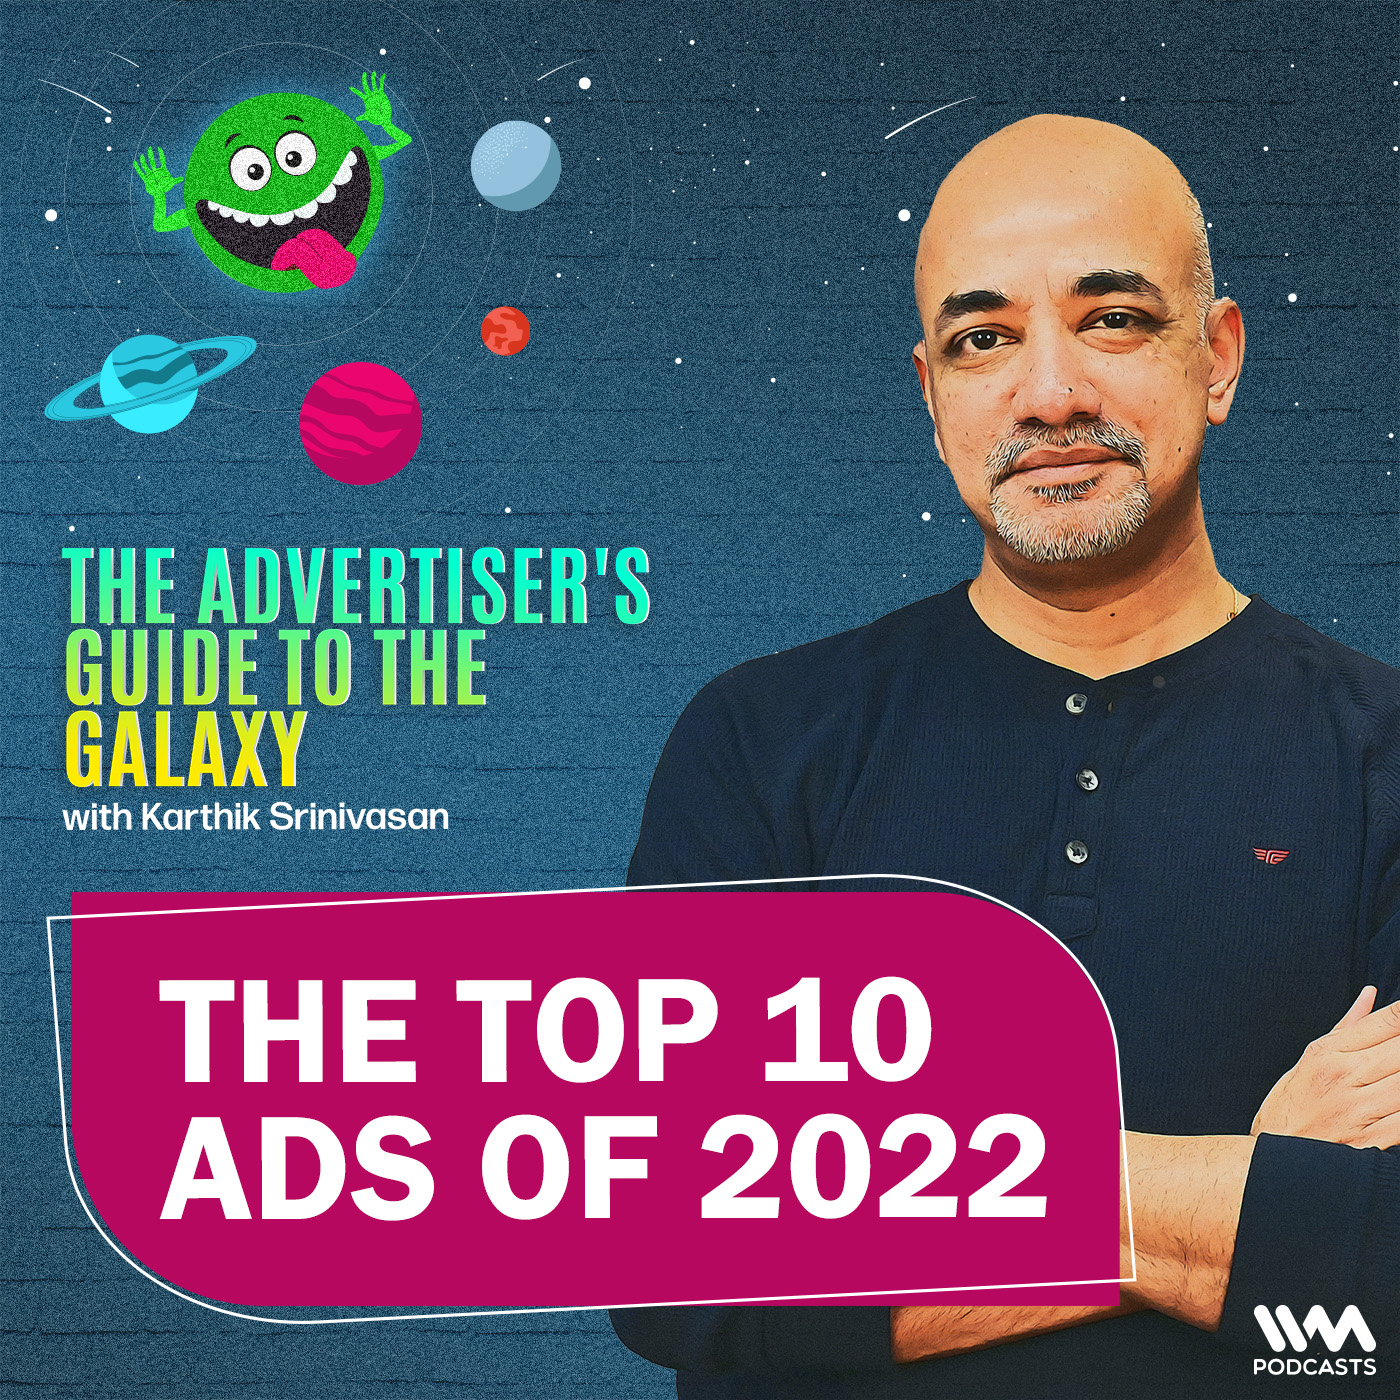 The Top 10 Ads of 2022